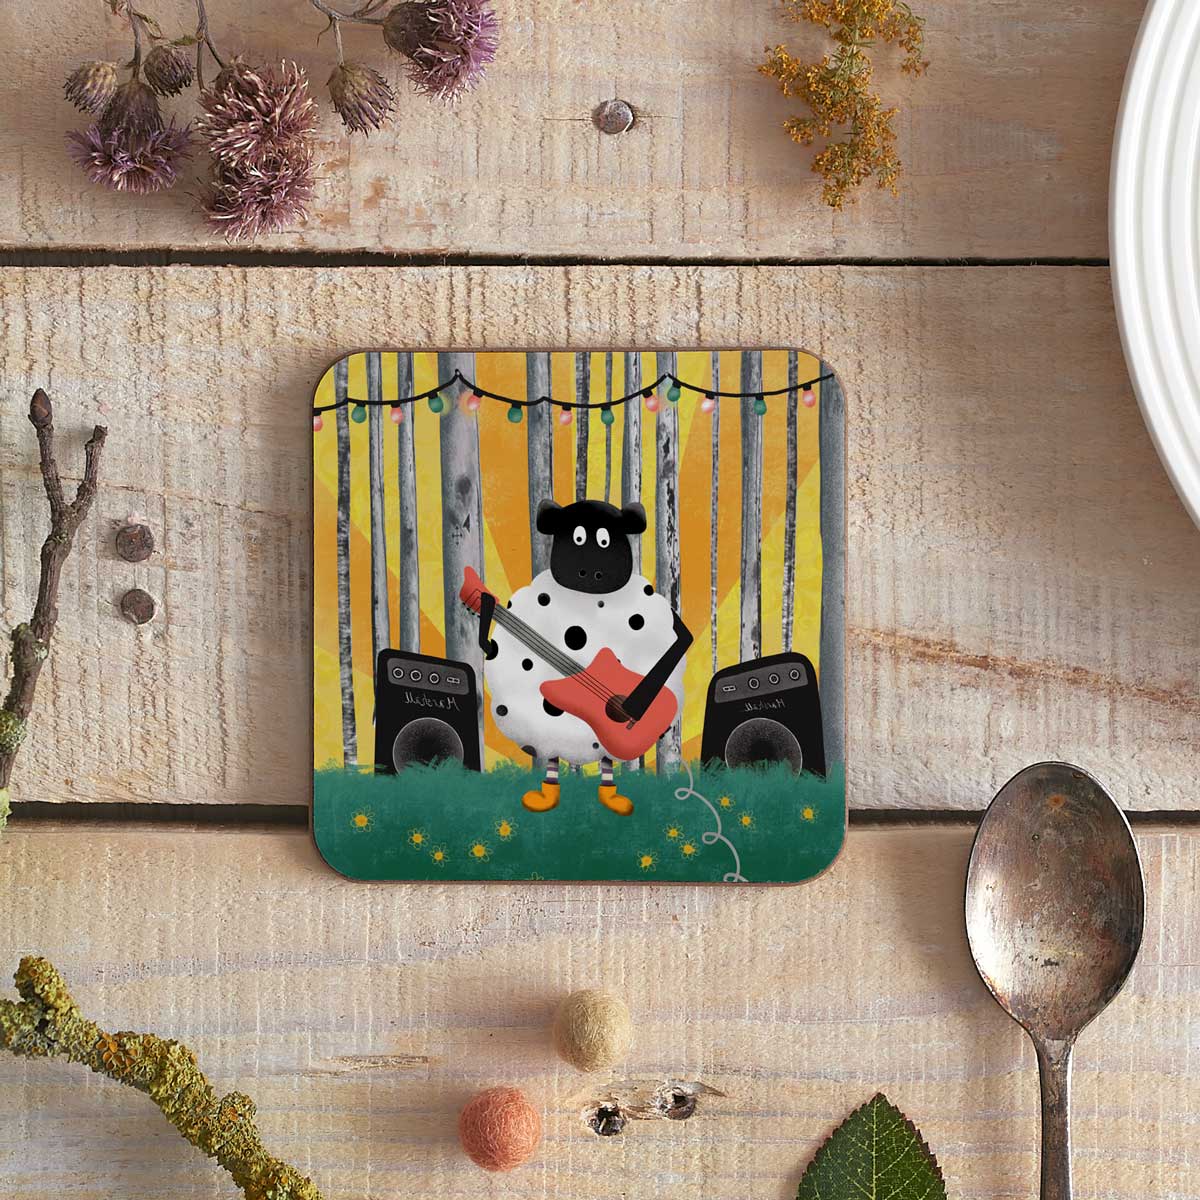 square coaster with a sheep playing an electric guitar